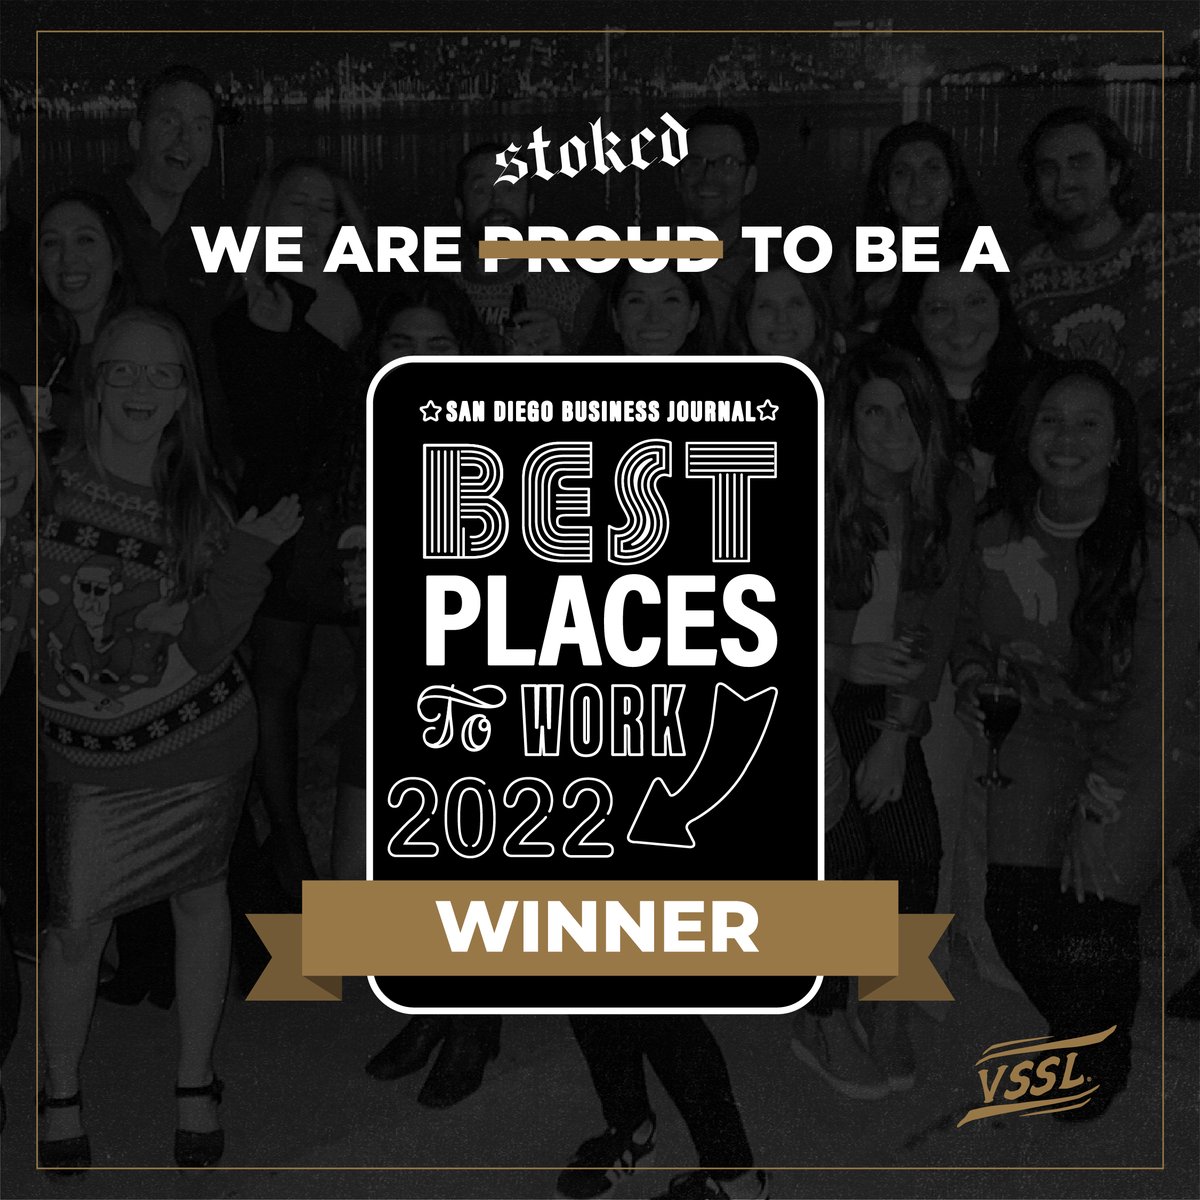 We are stoked to announce that VSSL has been named to @SDbusiness' list of top 100 places to work in San Diego. Congratulations to our crew for their hard work and dedication!

#SanDiegoBusinessJournal #Top100PlacestoWork